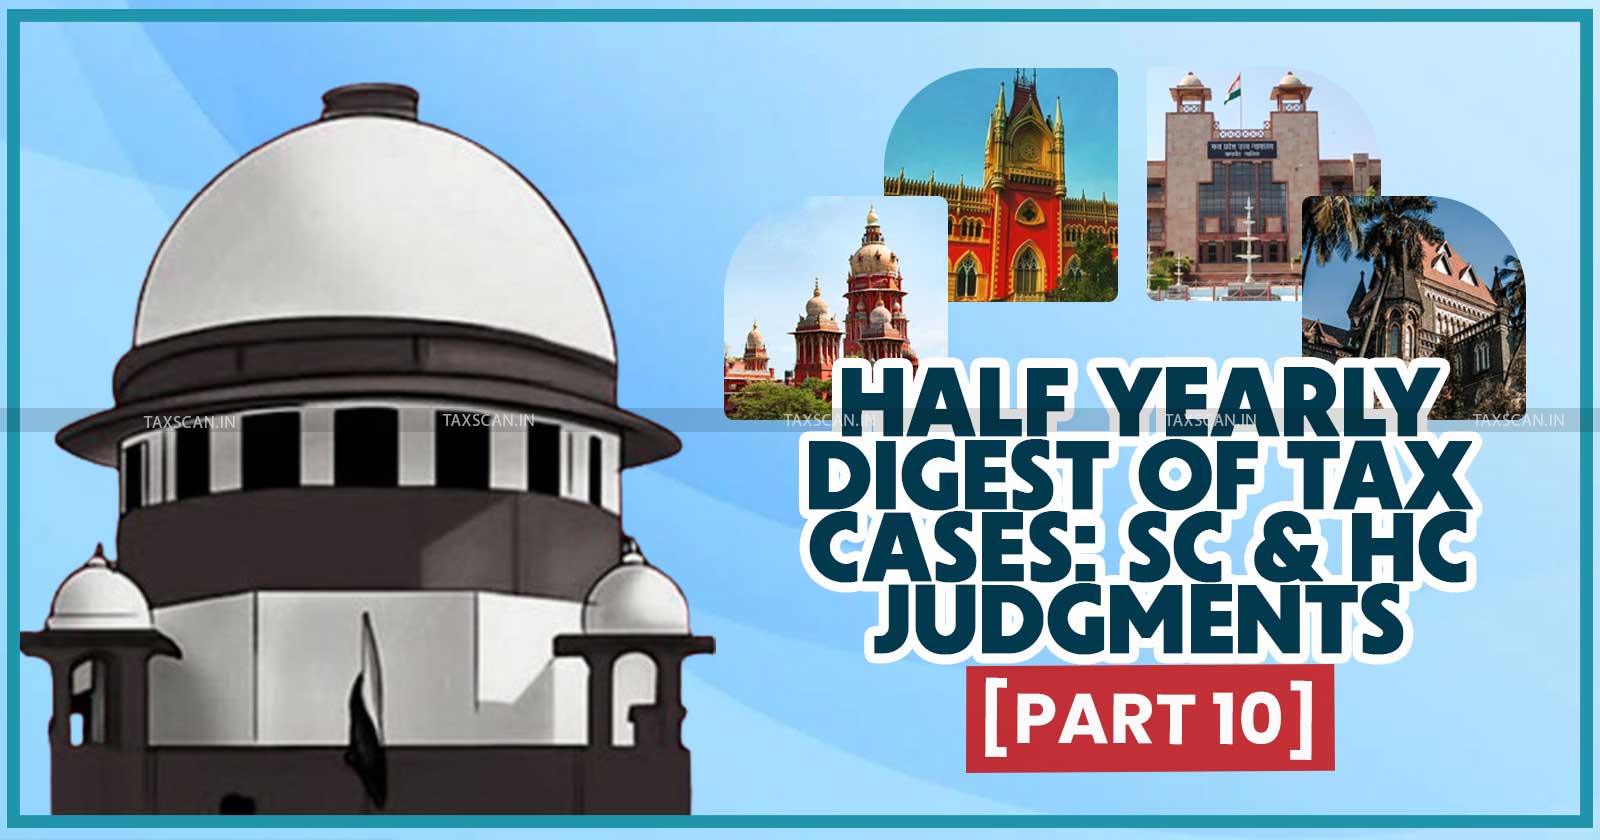 Half Yearly Case Digest - Supreme Court and High Courts Case Digest - Half Yearly Digest of Tax Cases - Supreme Court Tax Judgments - taxscan